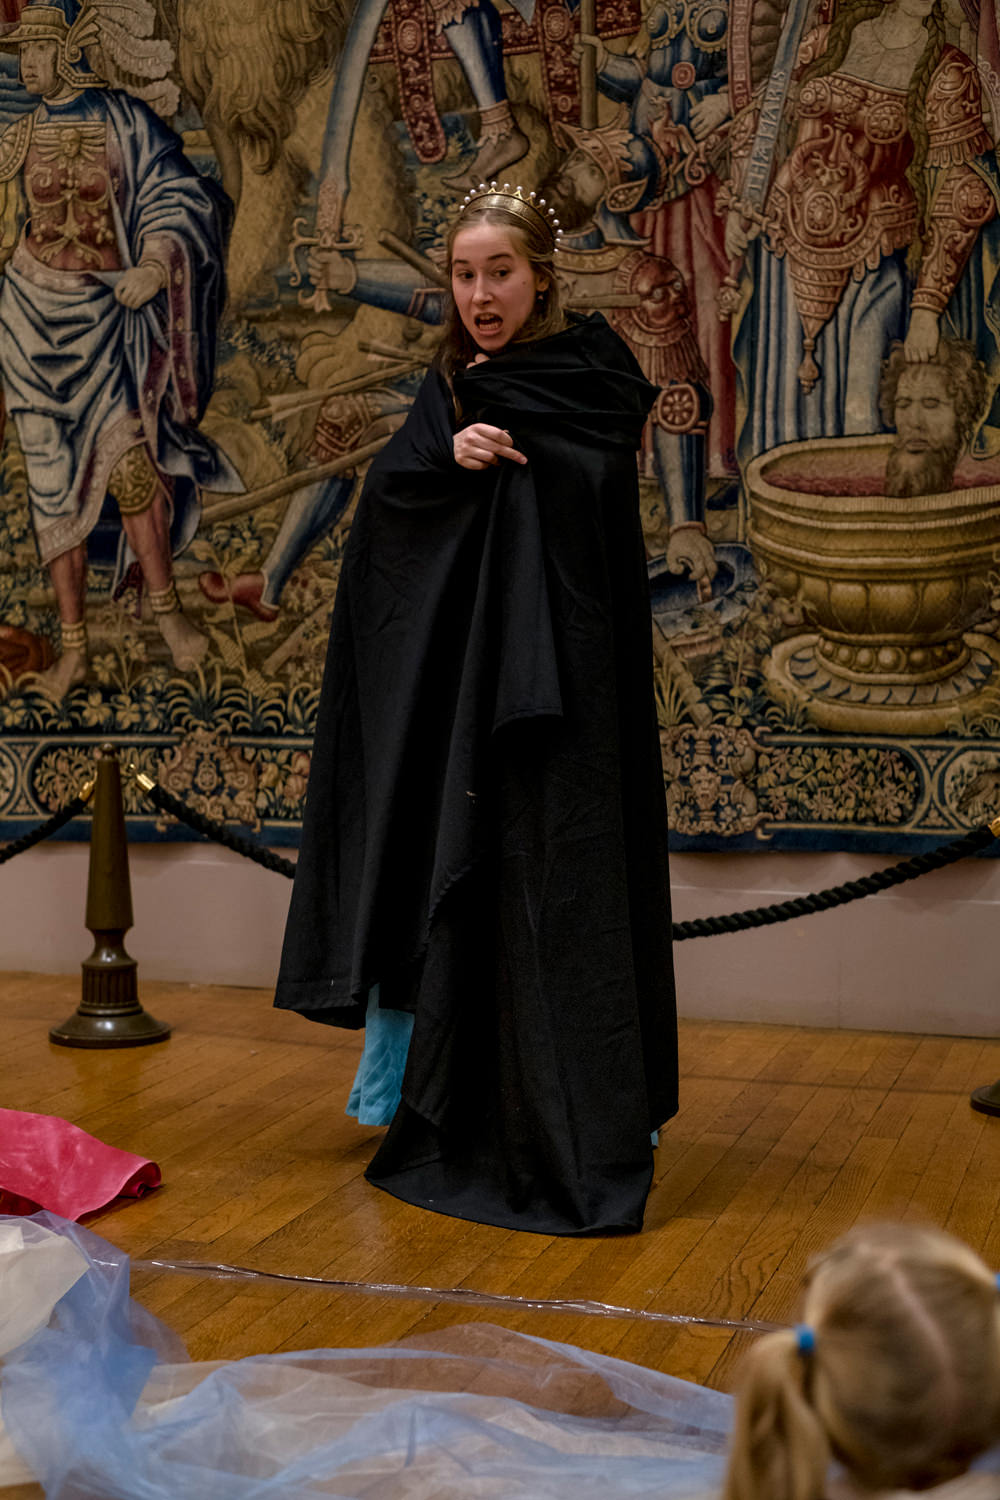 The actress wrapped in a black cloak